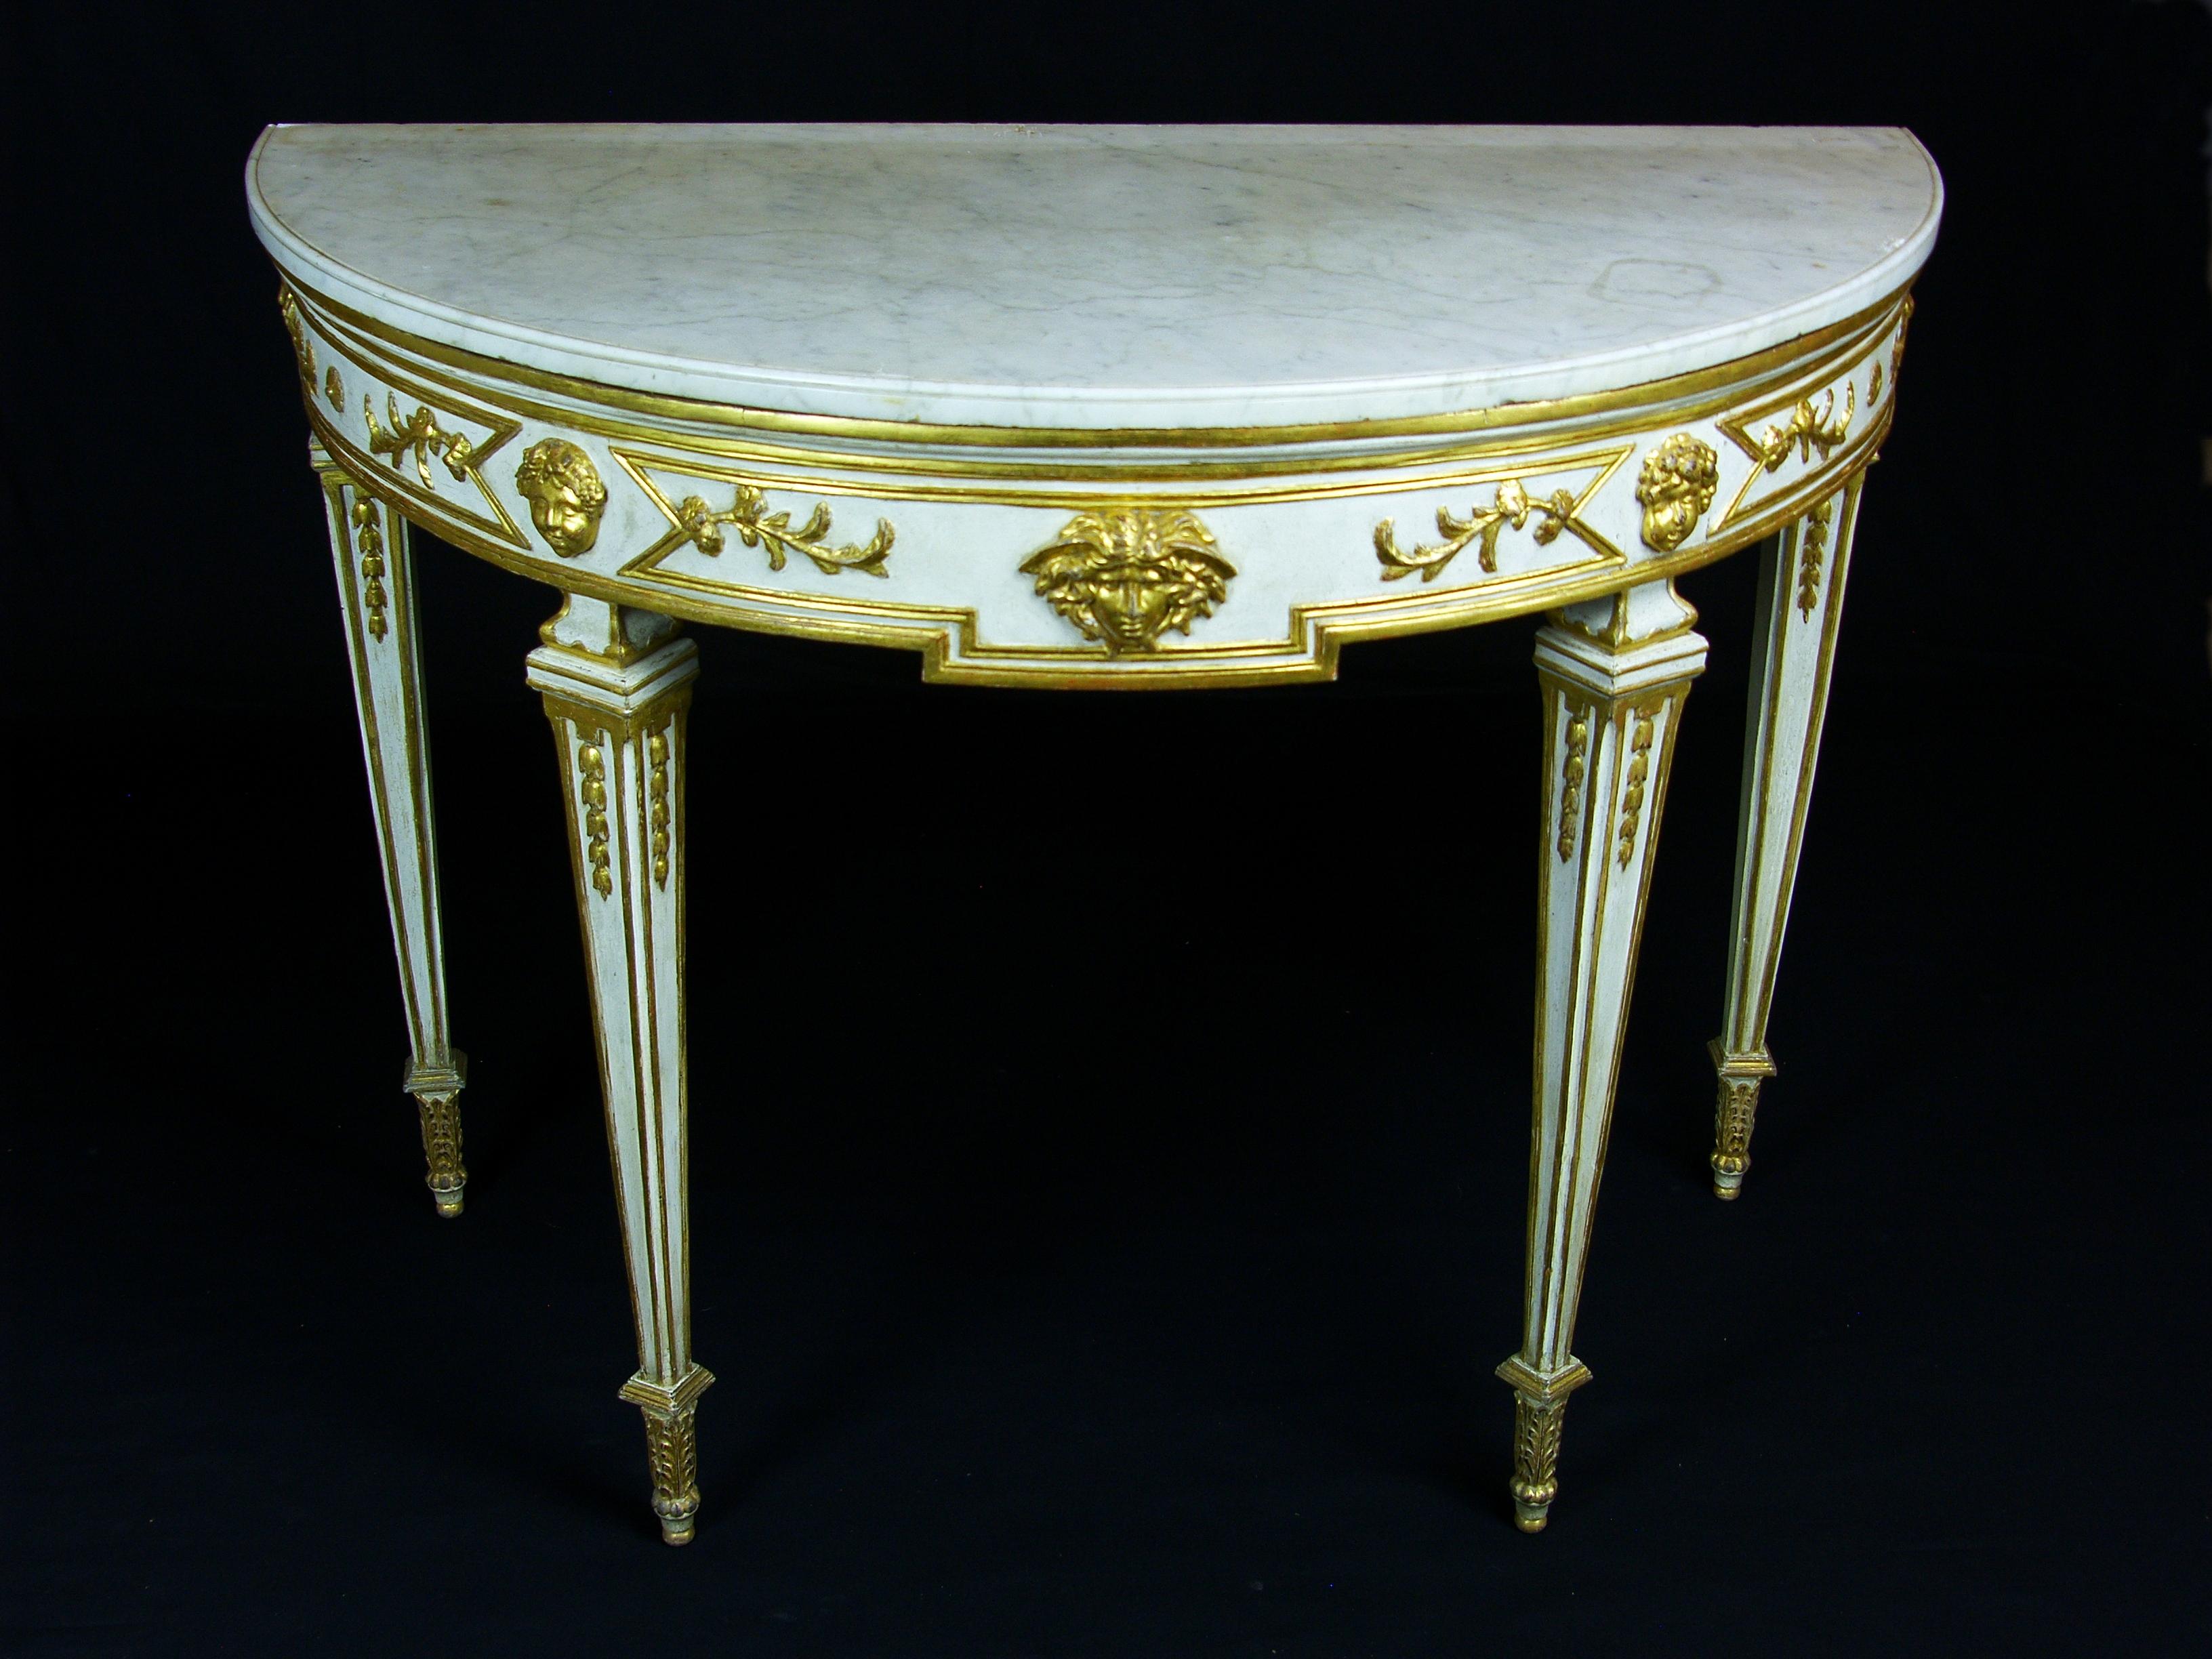 18th Century, Pair of Italian Half-Moon Lacquered Giltwood Neoclassical Console For Sale 2